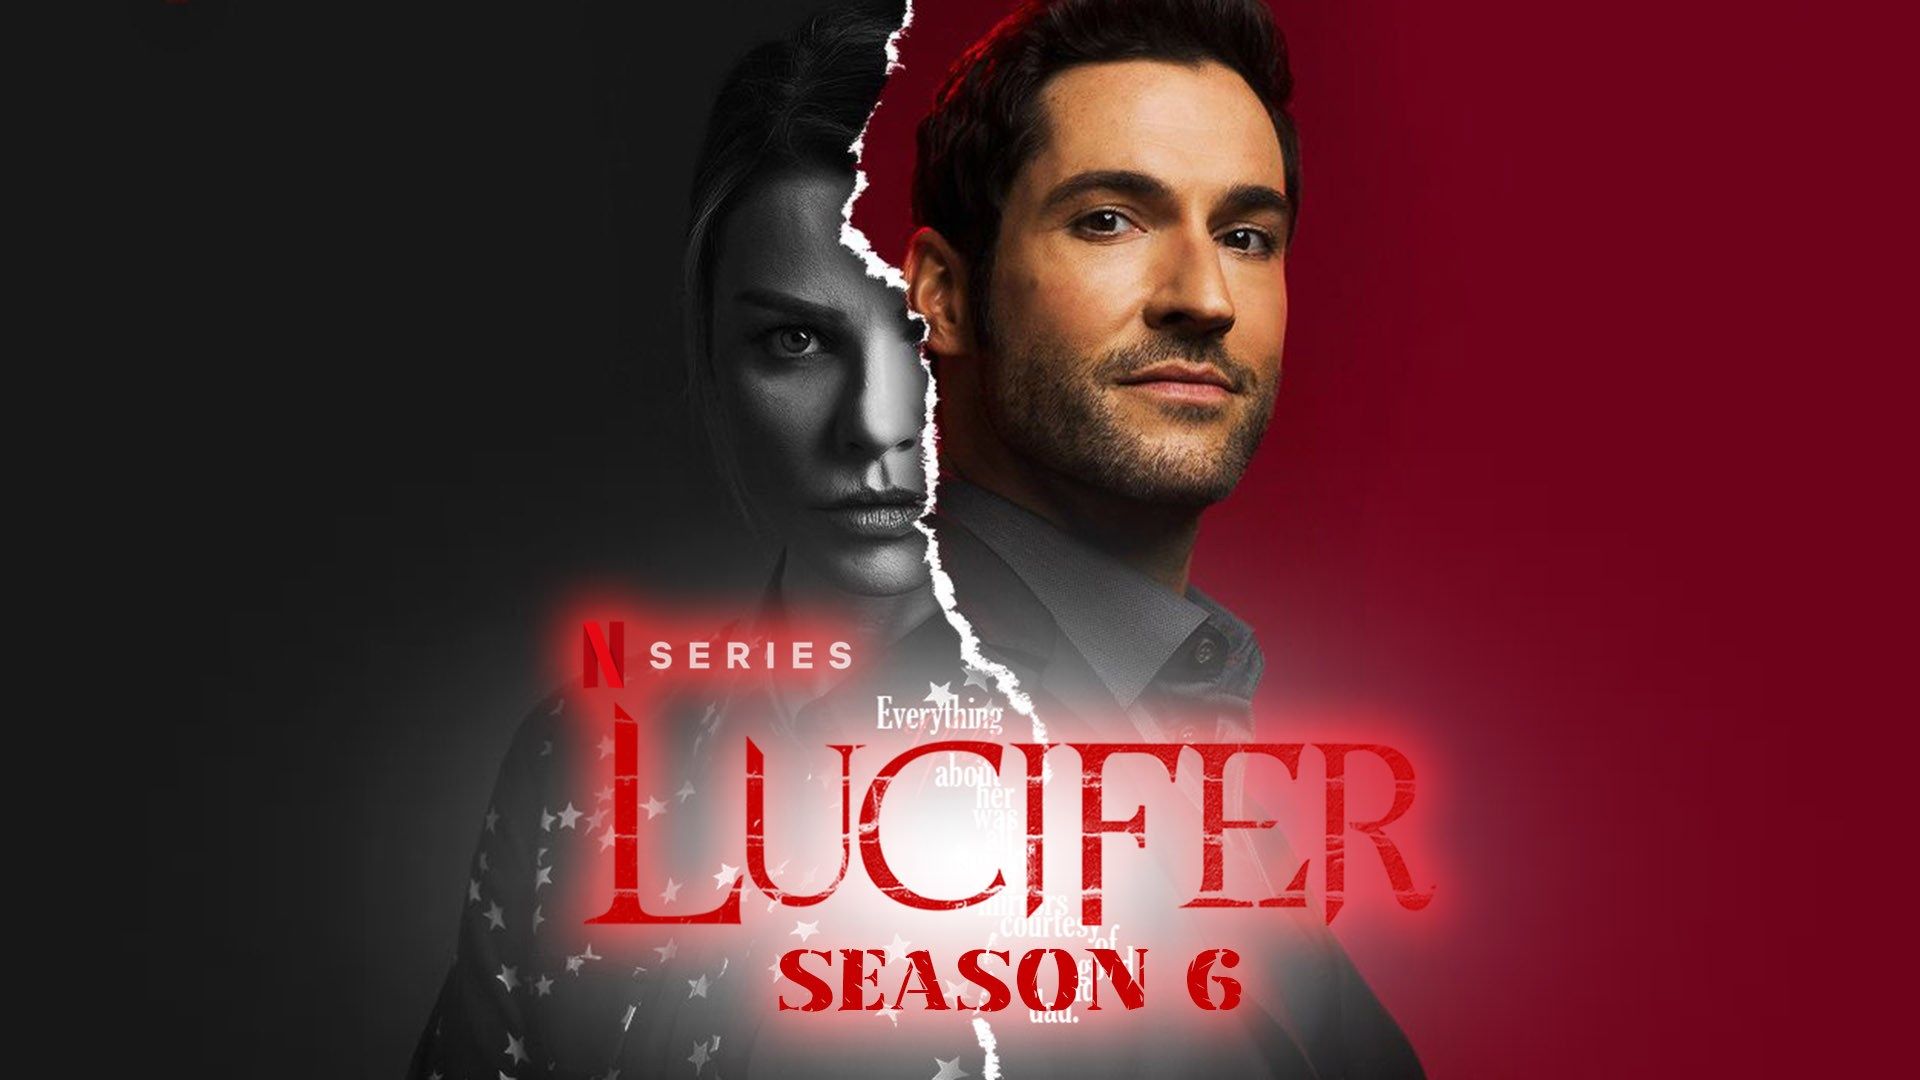 LUCIFER SEASON 5: RELEASE DATE DELAYED DUE TO PANDEMIC